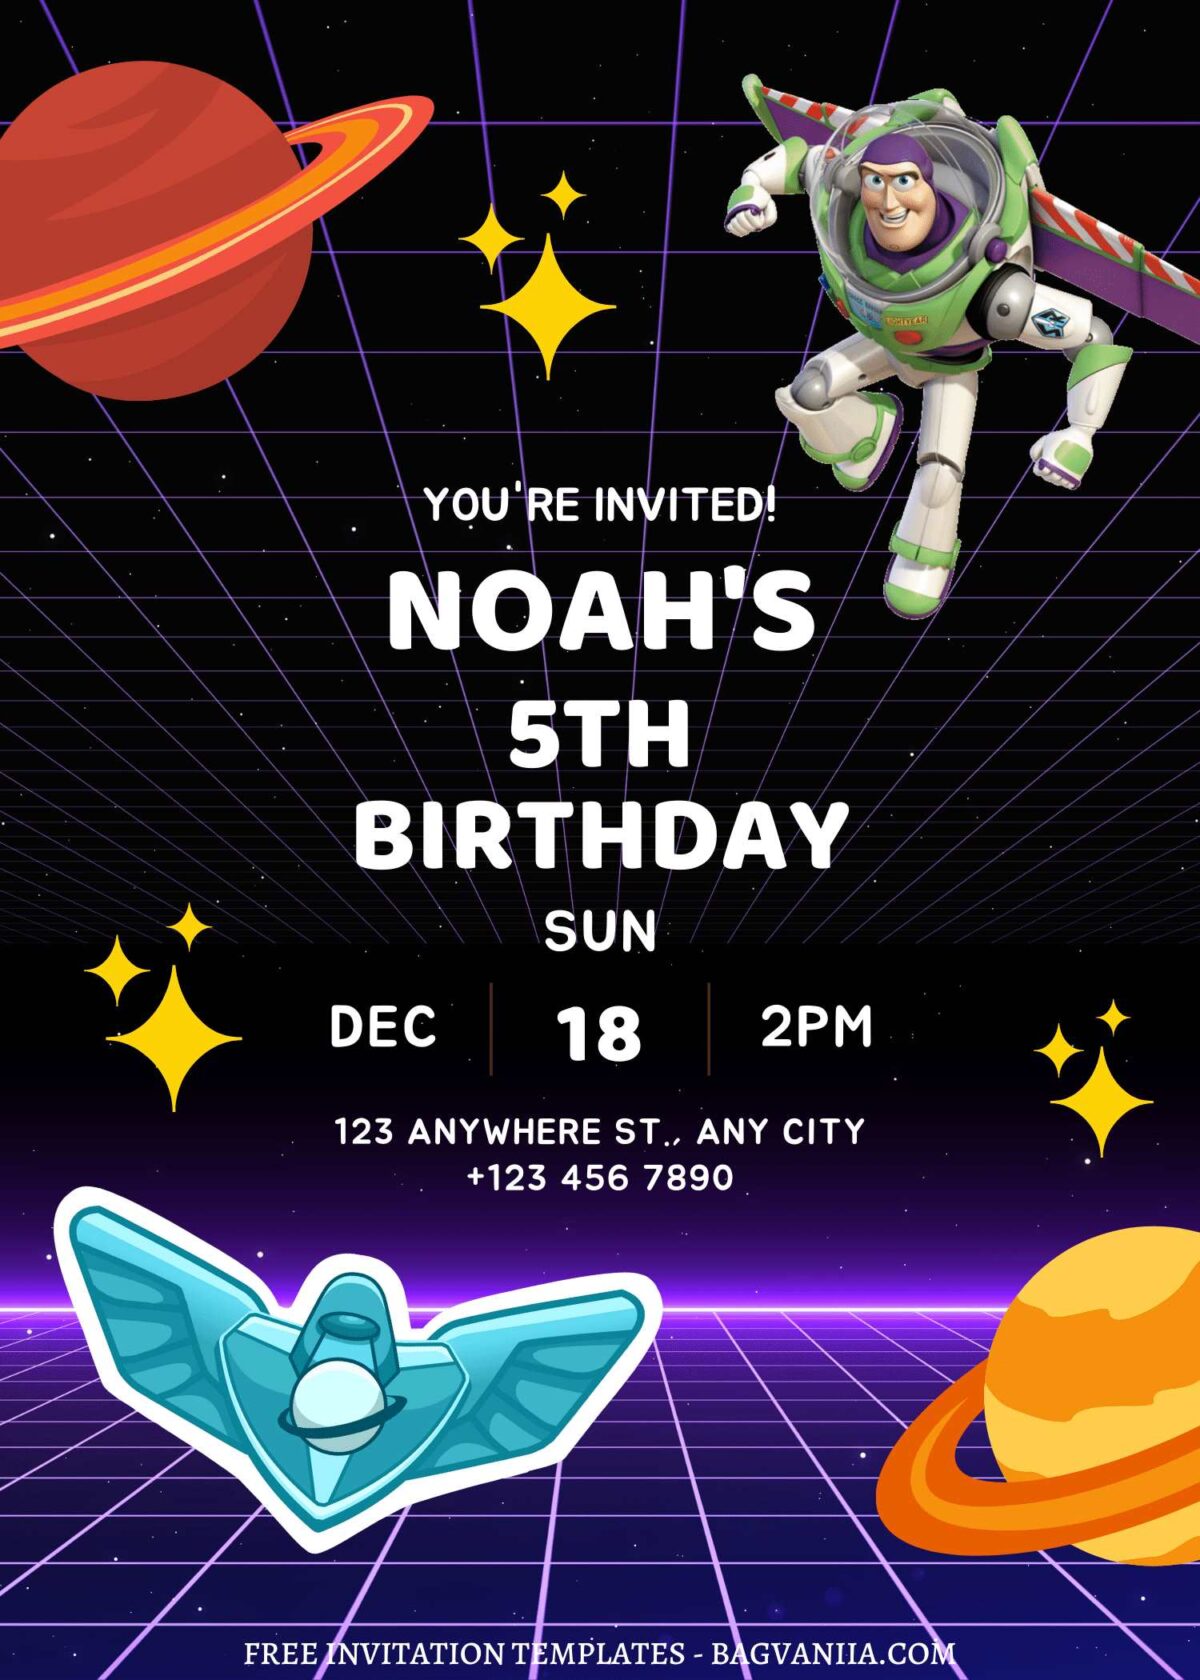 FREE EDITABLE - 8+ Space Ranger Buzz Canva Birthday Invitation Templates  with cute text